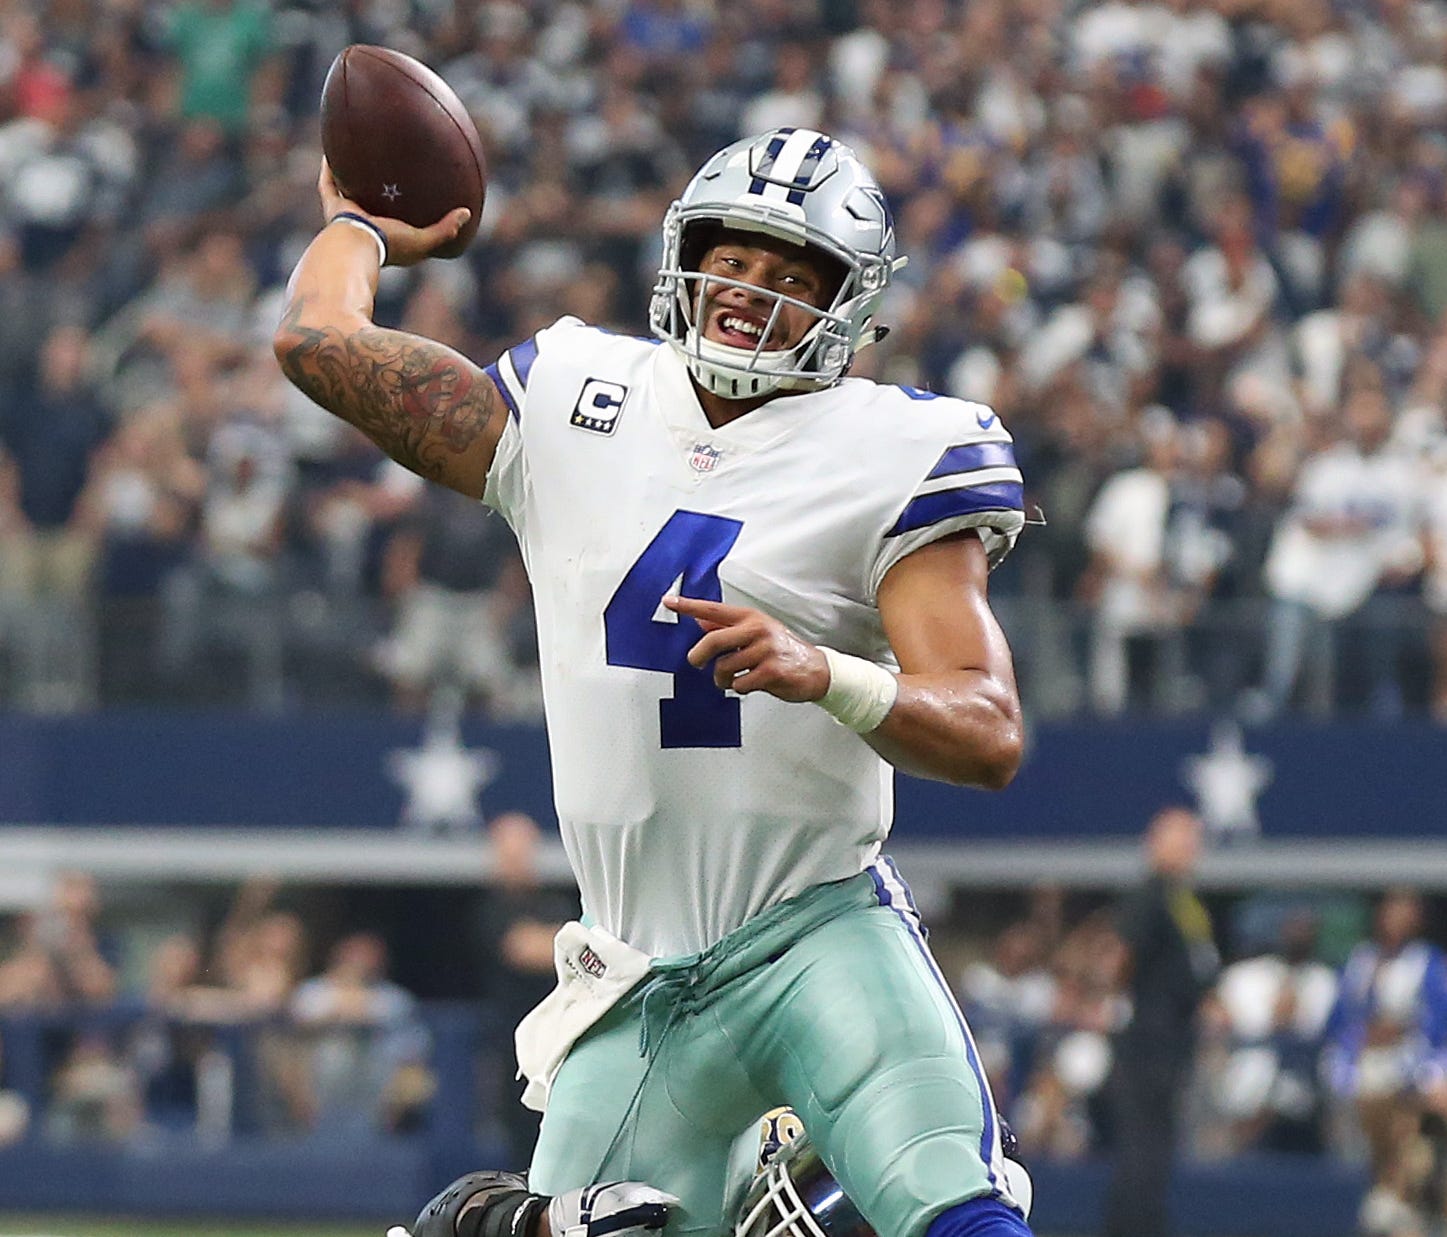 Dallas Cowboys quarterback Dak Prescott (4) throws under pressure from Los Angeles Rams linebacker Alec Ogletree (52) during a two point conversion attempt in the fourth quarter at AT&T Stadium.